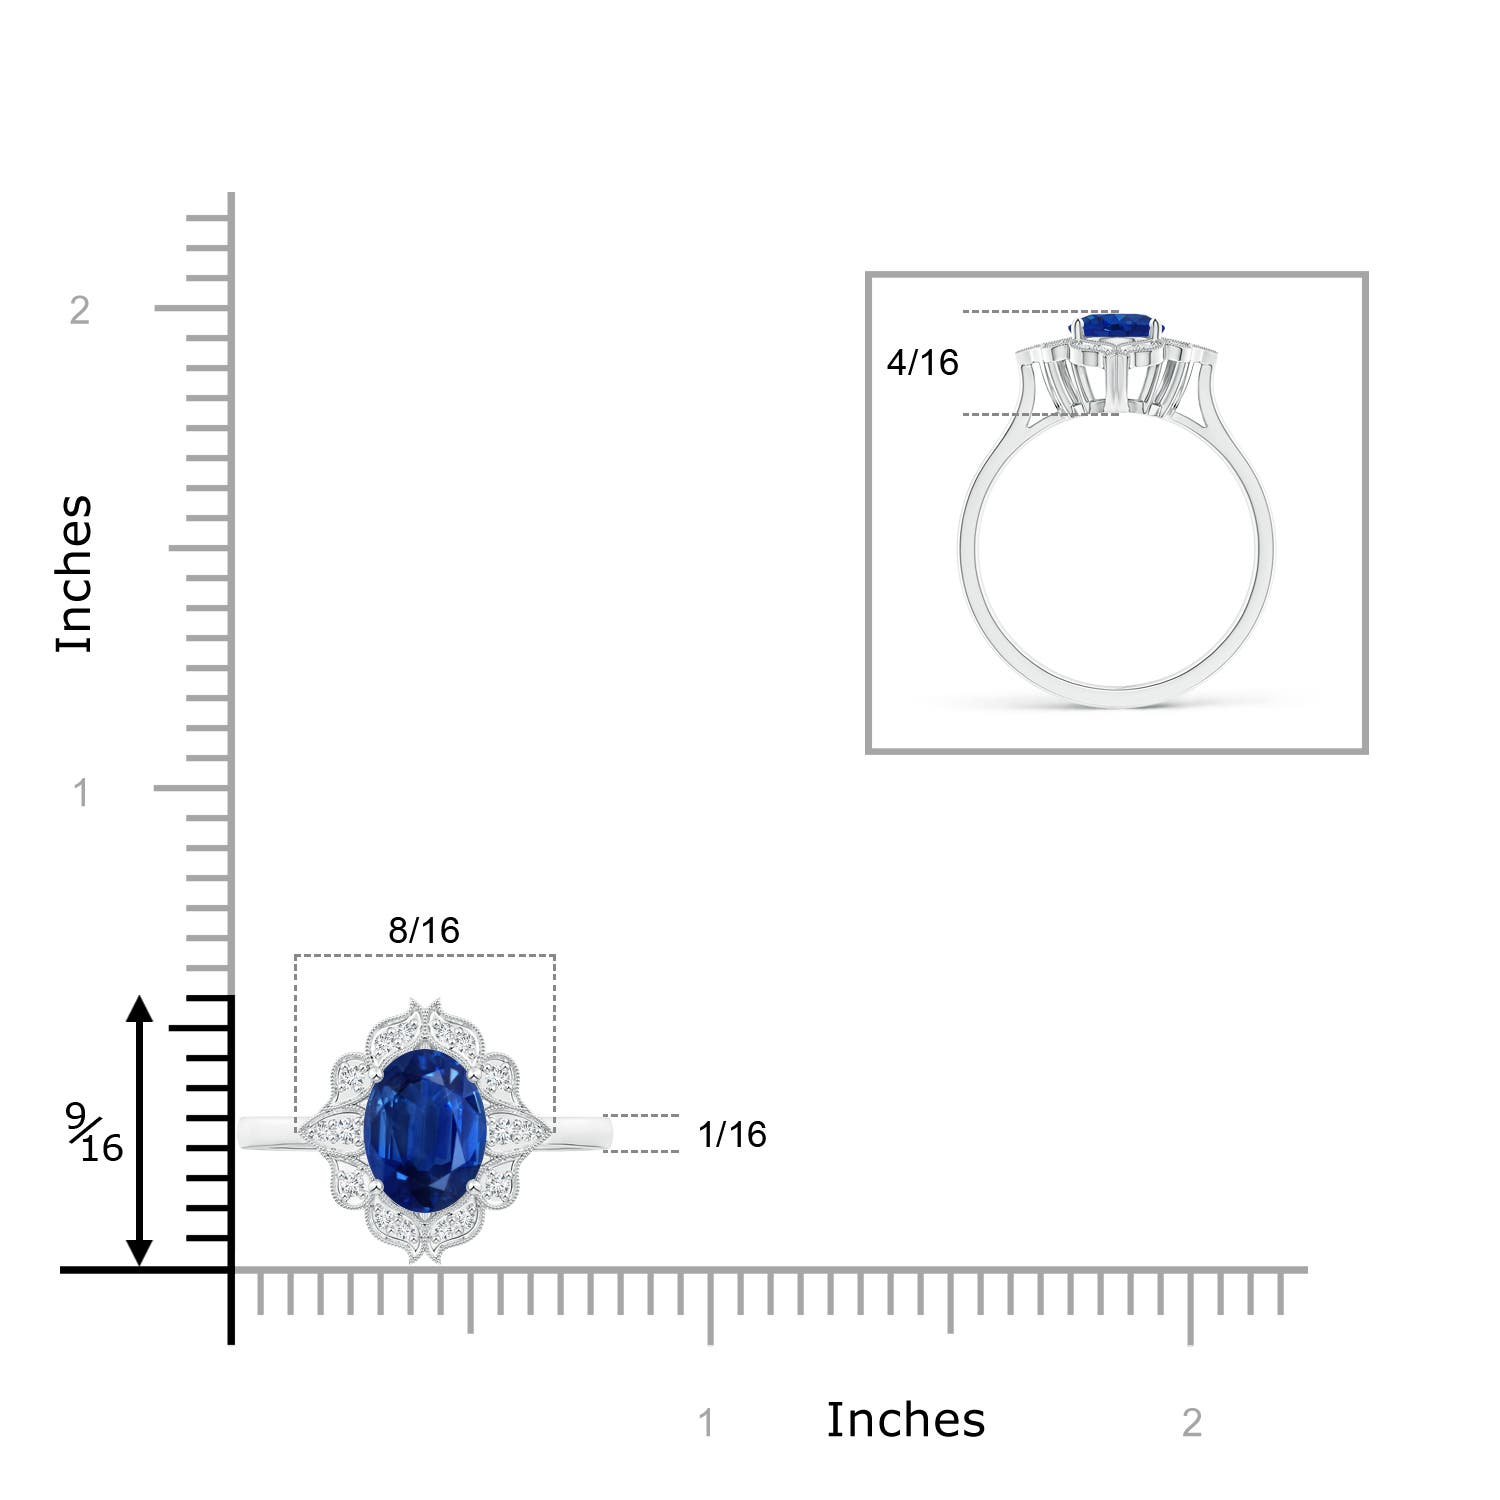 AAA - Blue Sapphire / 1.65 CT / 14 KT White Gold